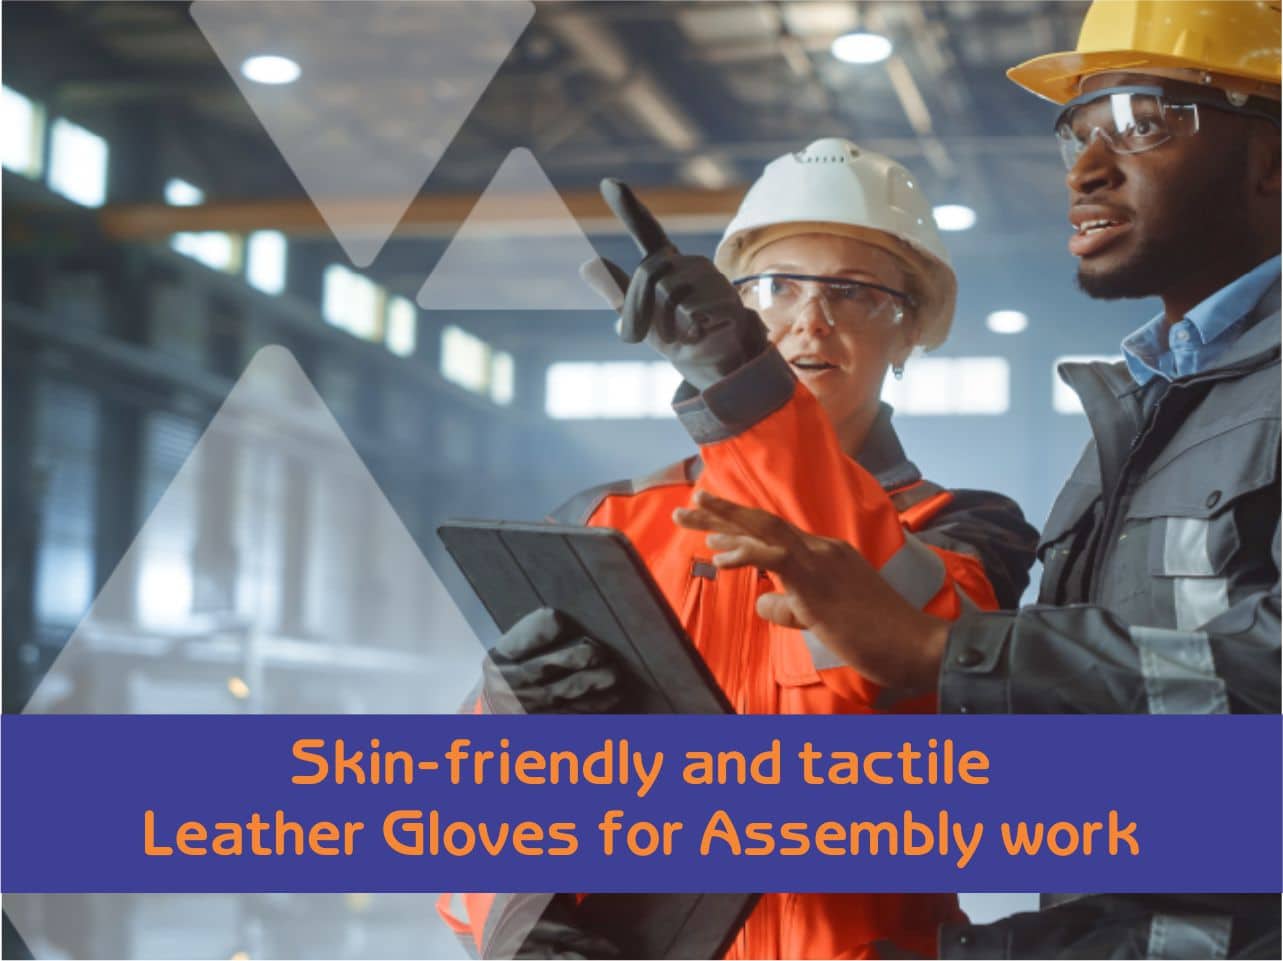 Skin-friendly and tactile Leather Gloves for Assembly work